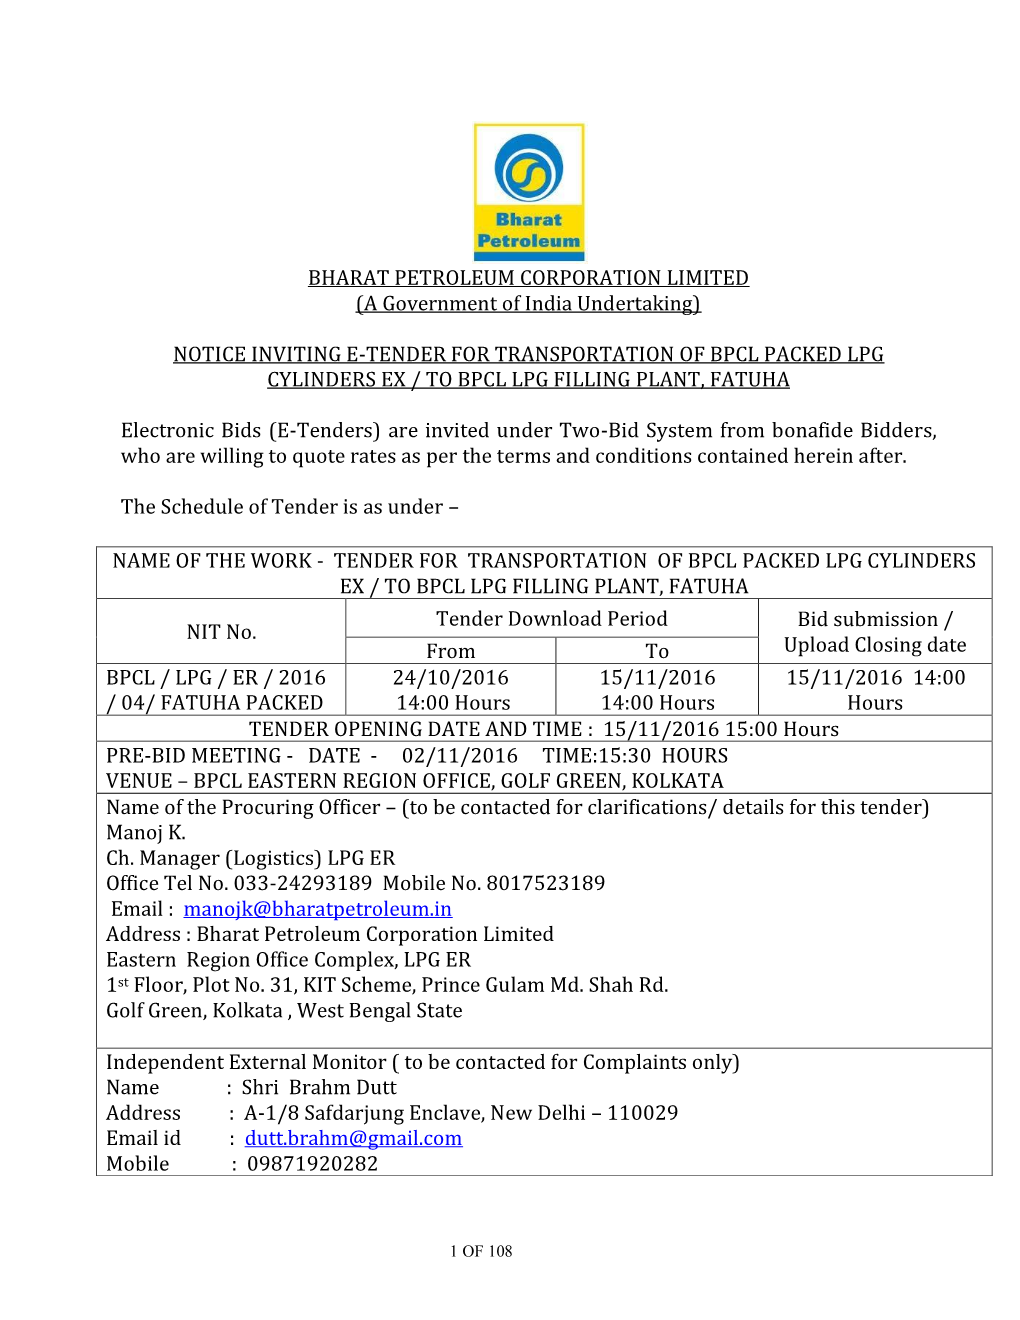 BHARAT PETROLEUM CORPORATION LIMITED (A Government of India Undertaking)